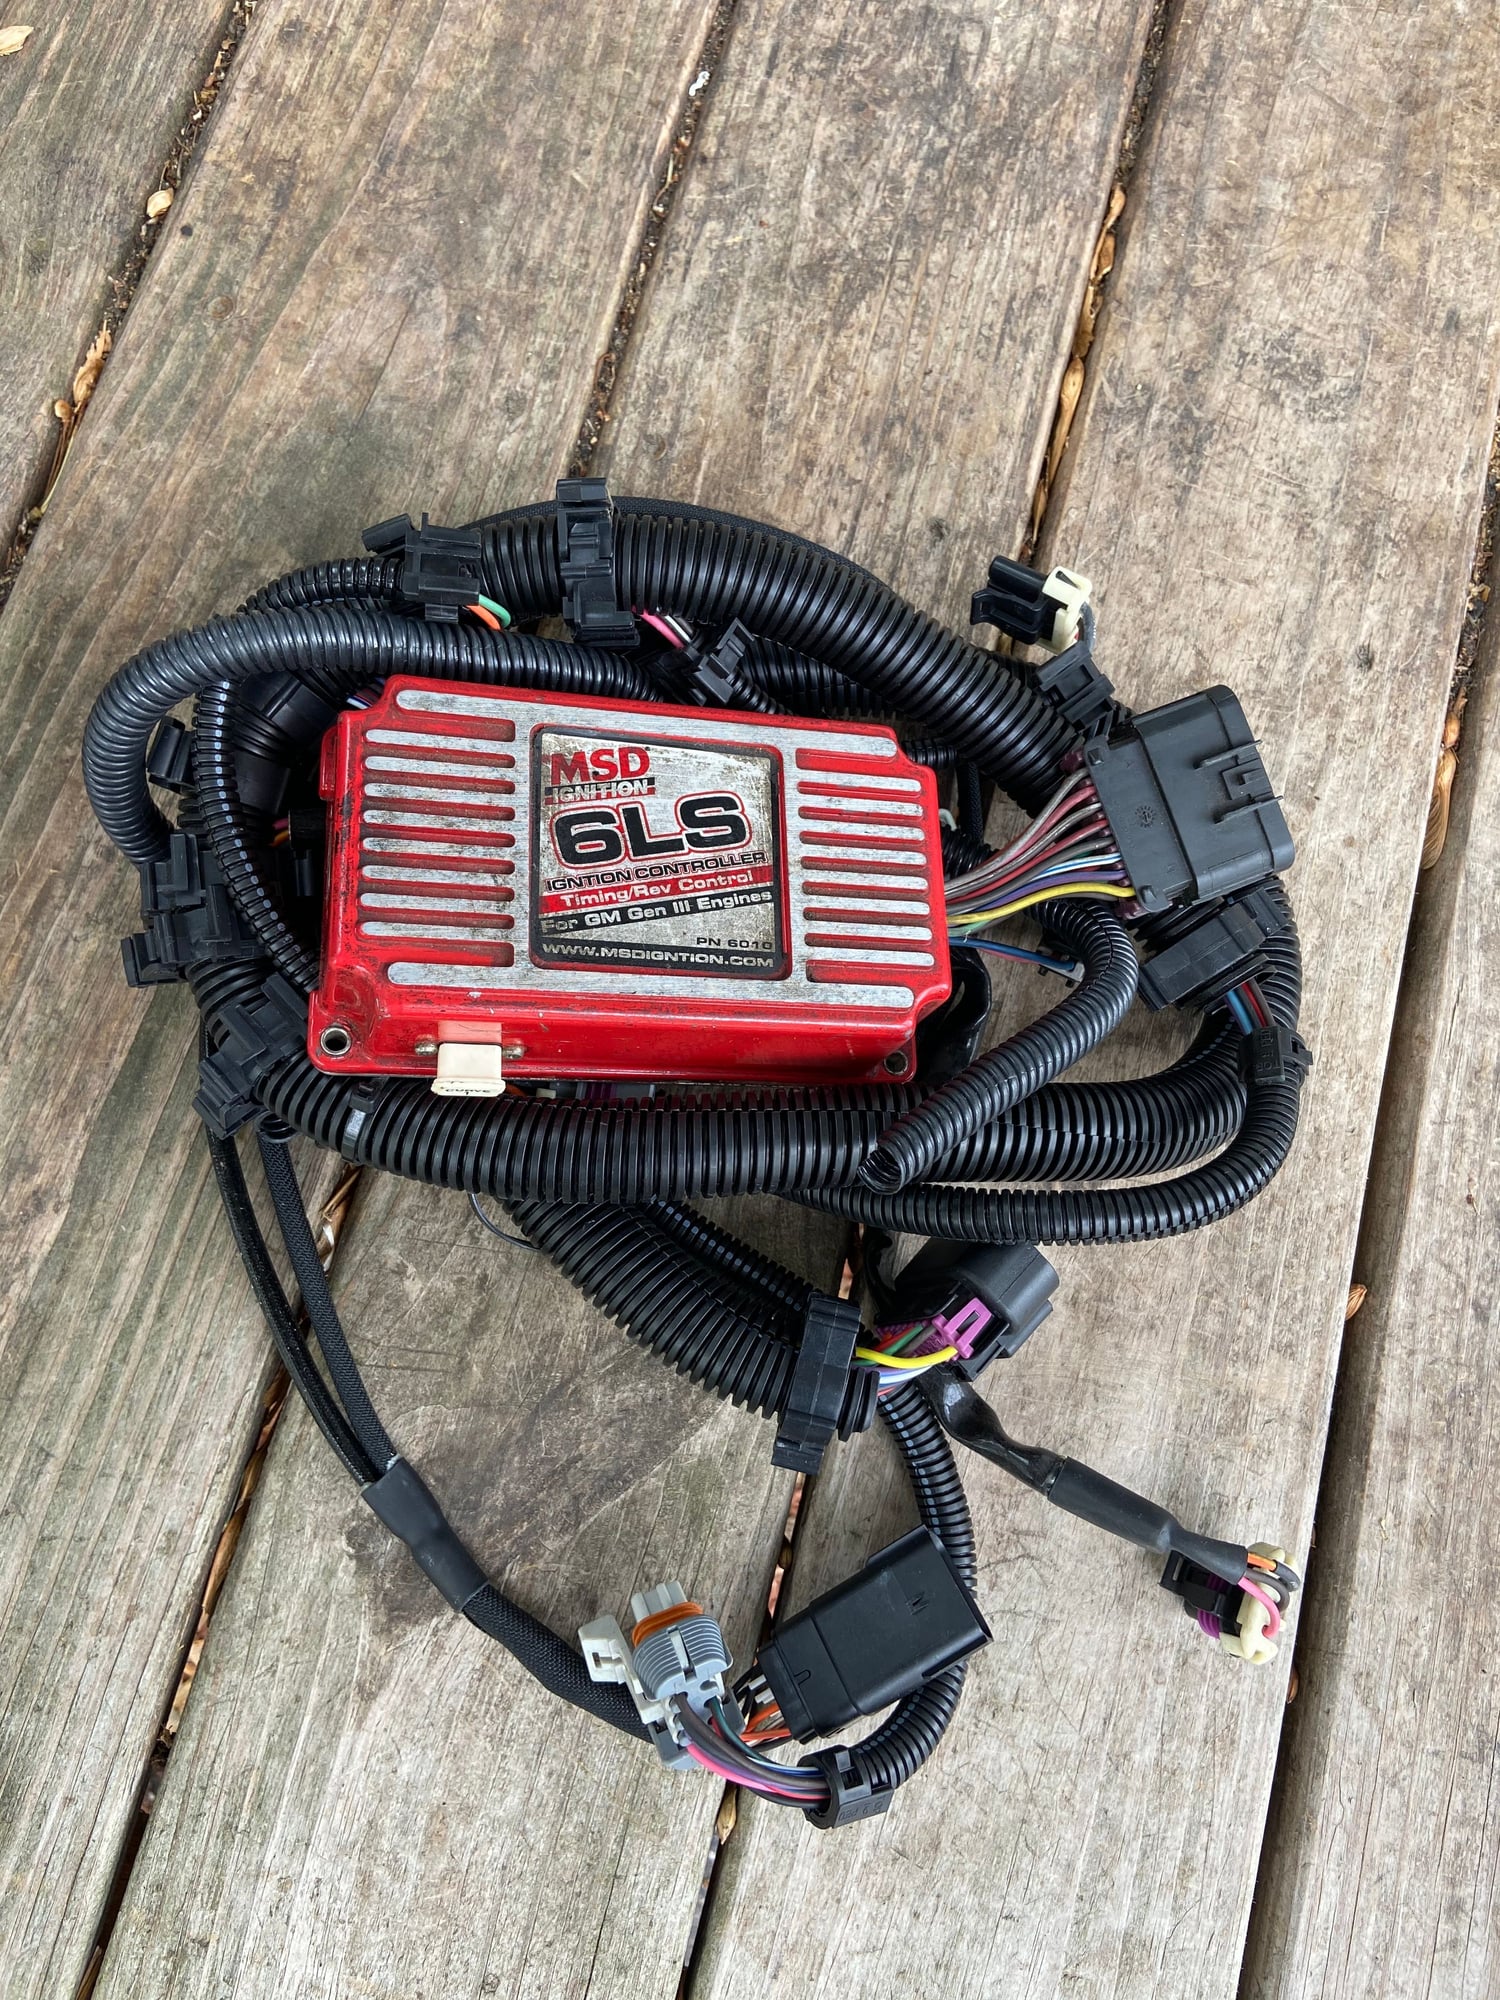 Miscellaneous - Msd 6010 with harness - Used - 0  All Models - Moberly, MO 65270, United States